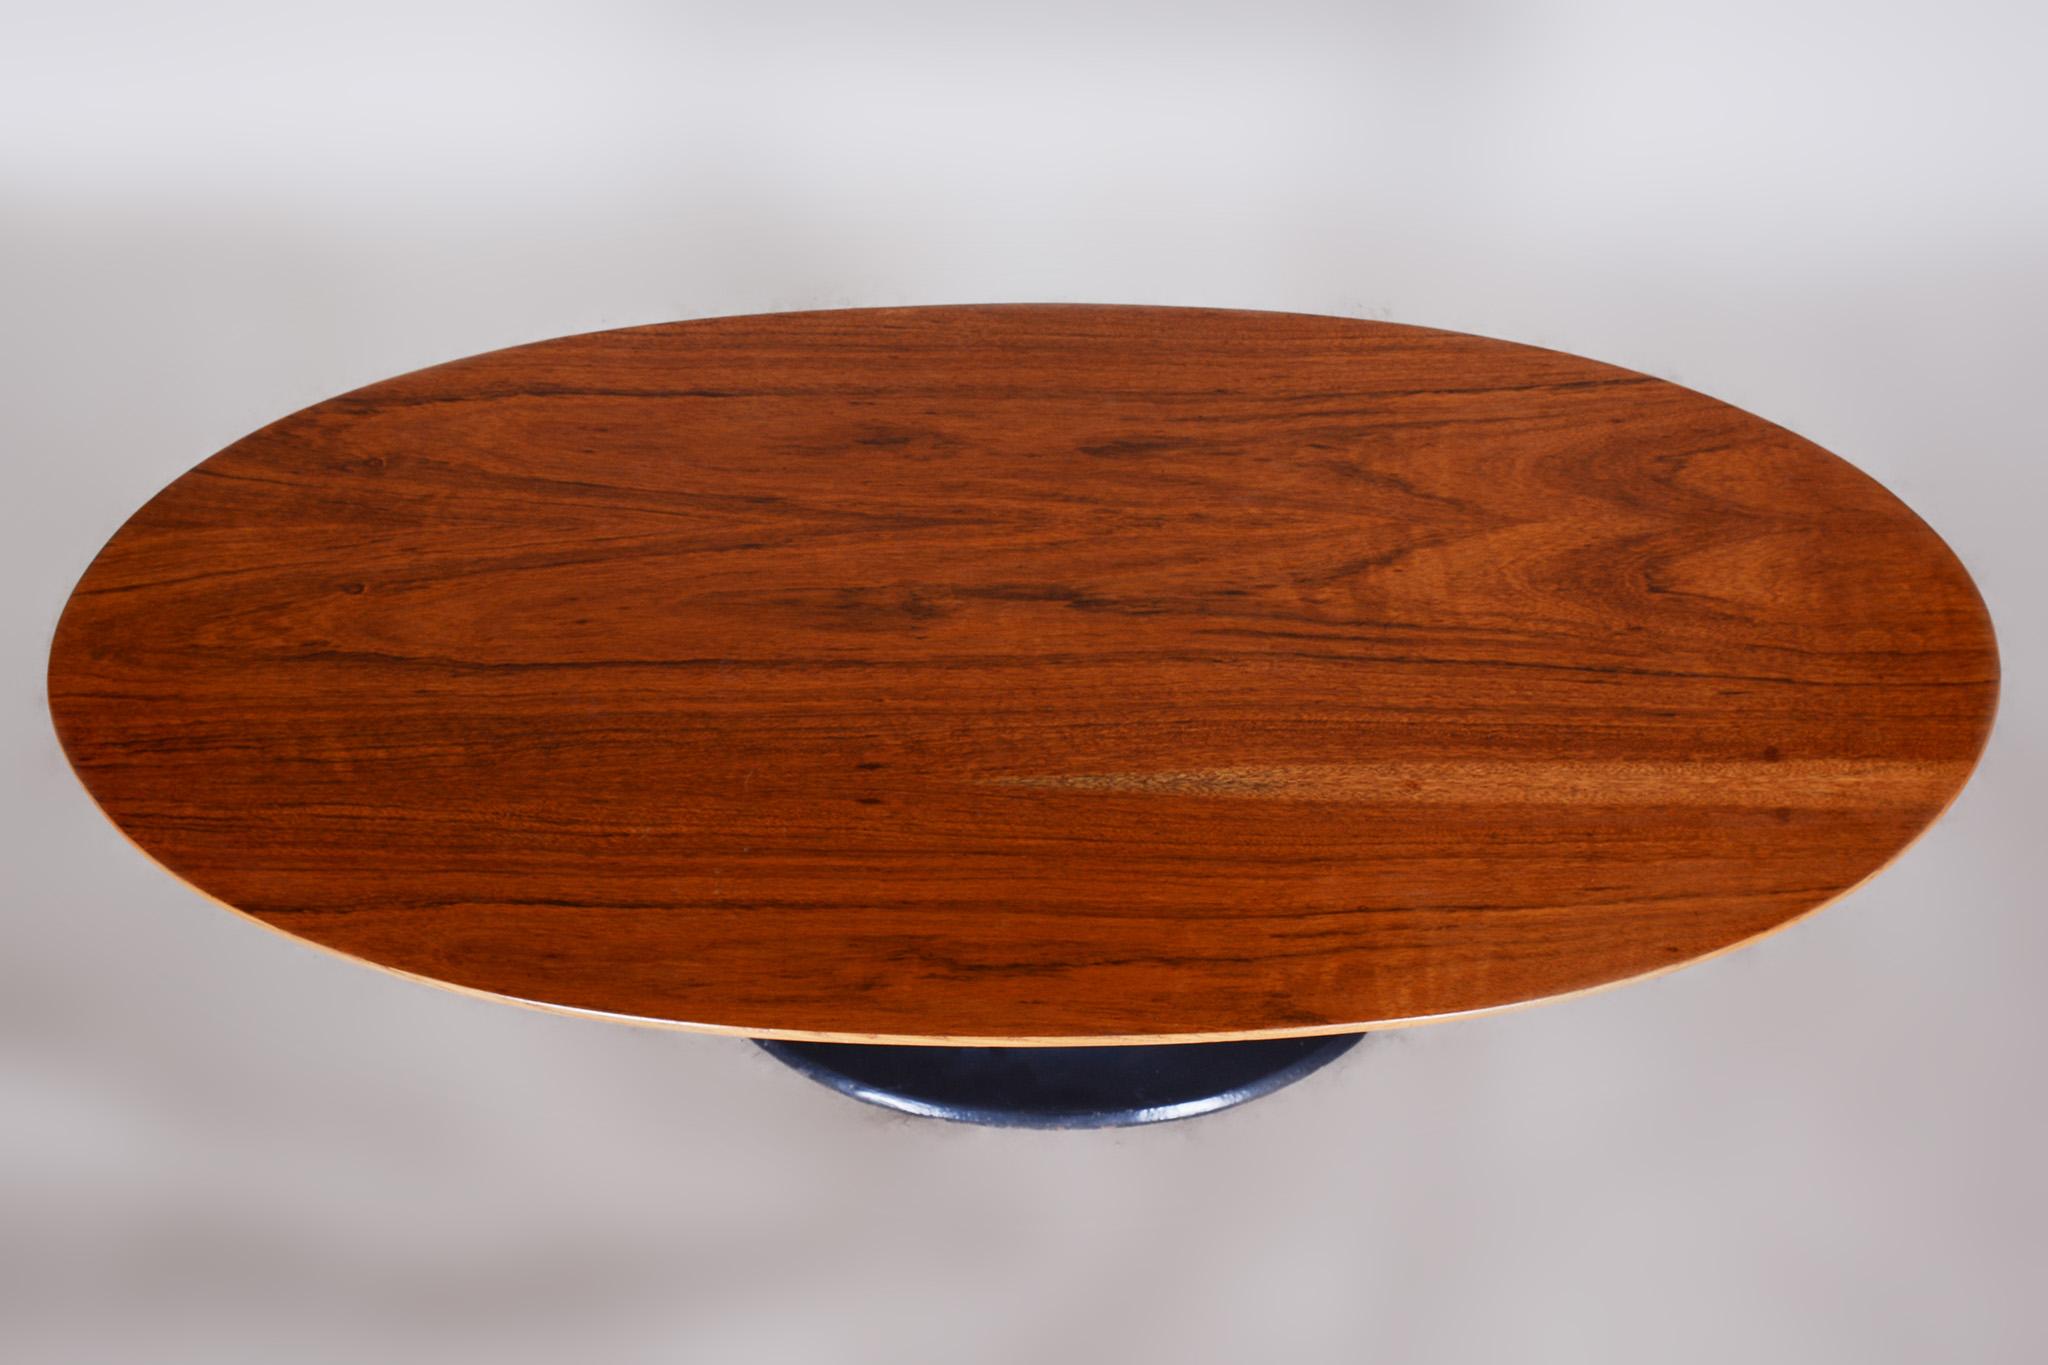 Wood Czech Mid-Century Rosewood Oval Table with Cast Iron Base, 1950s For Sale